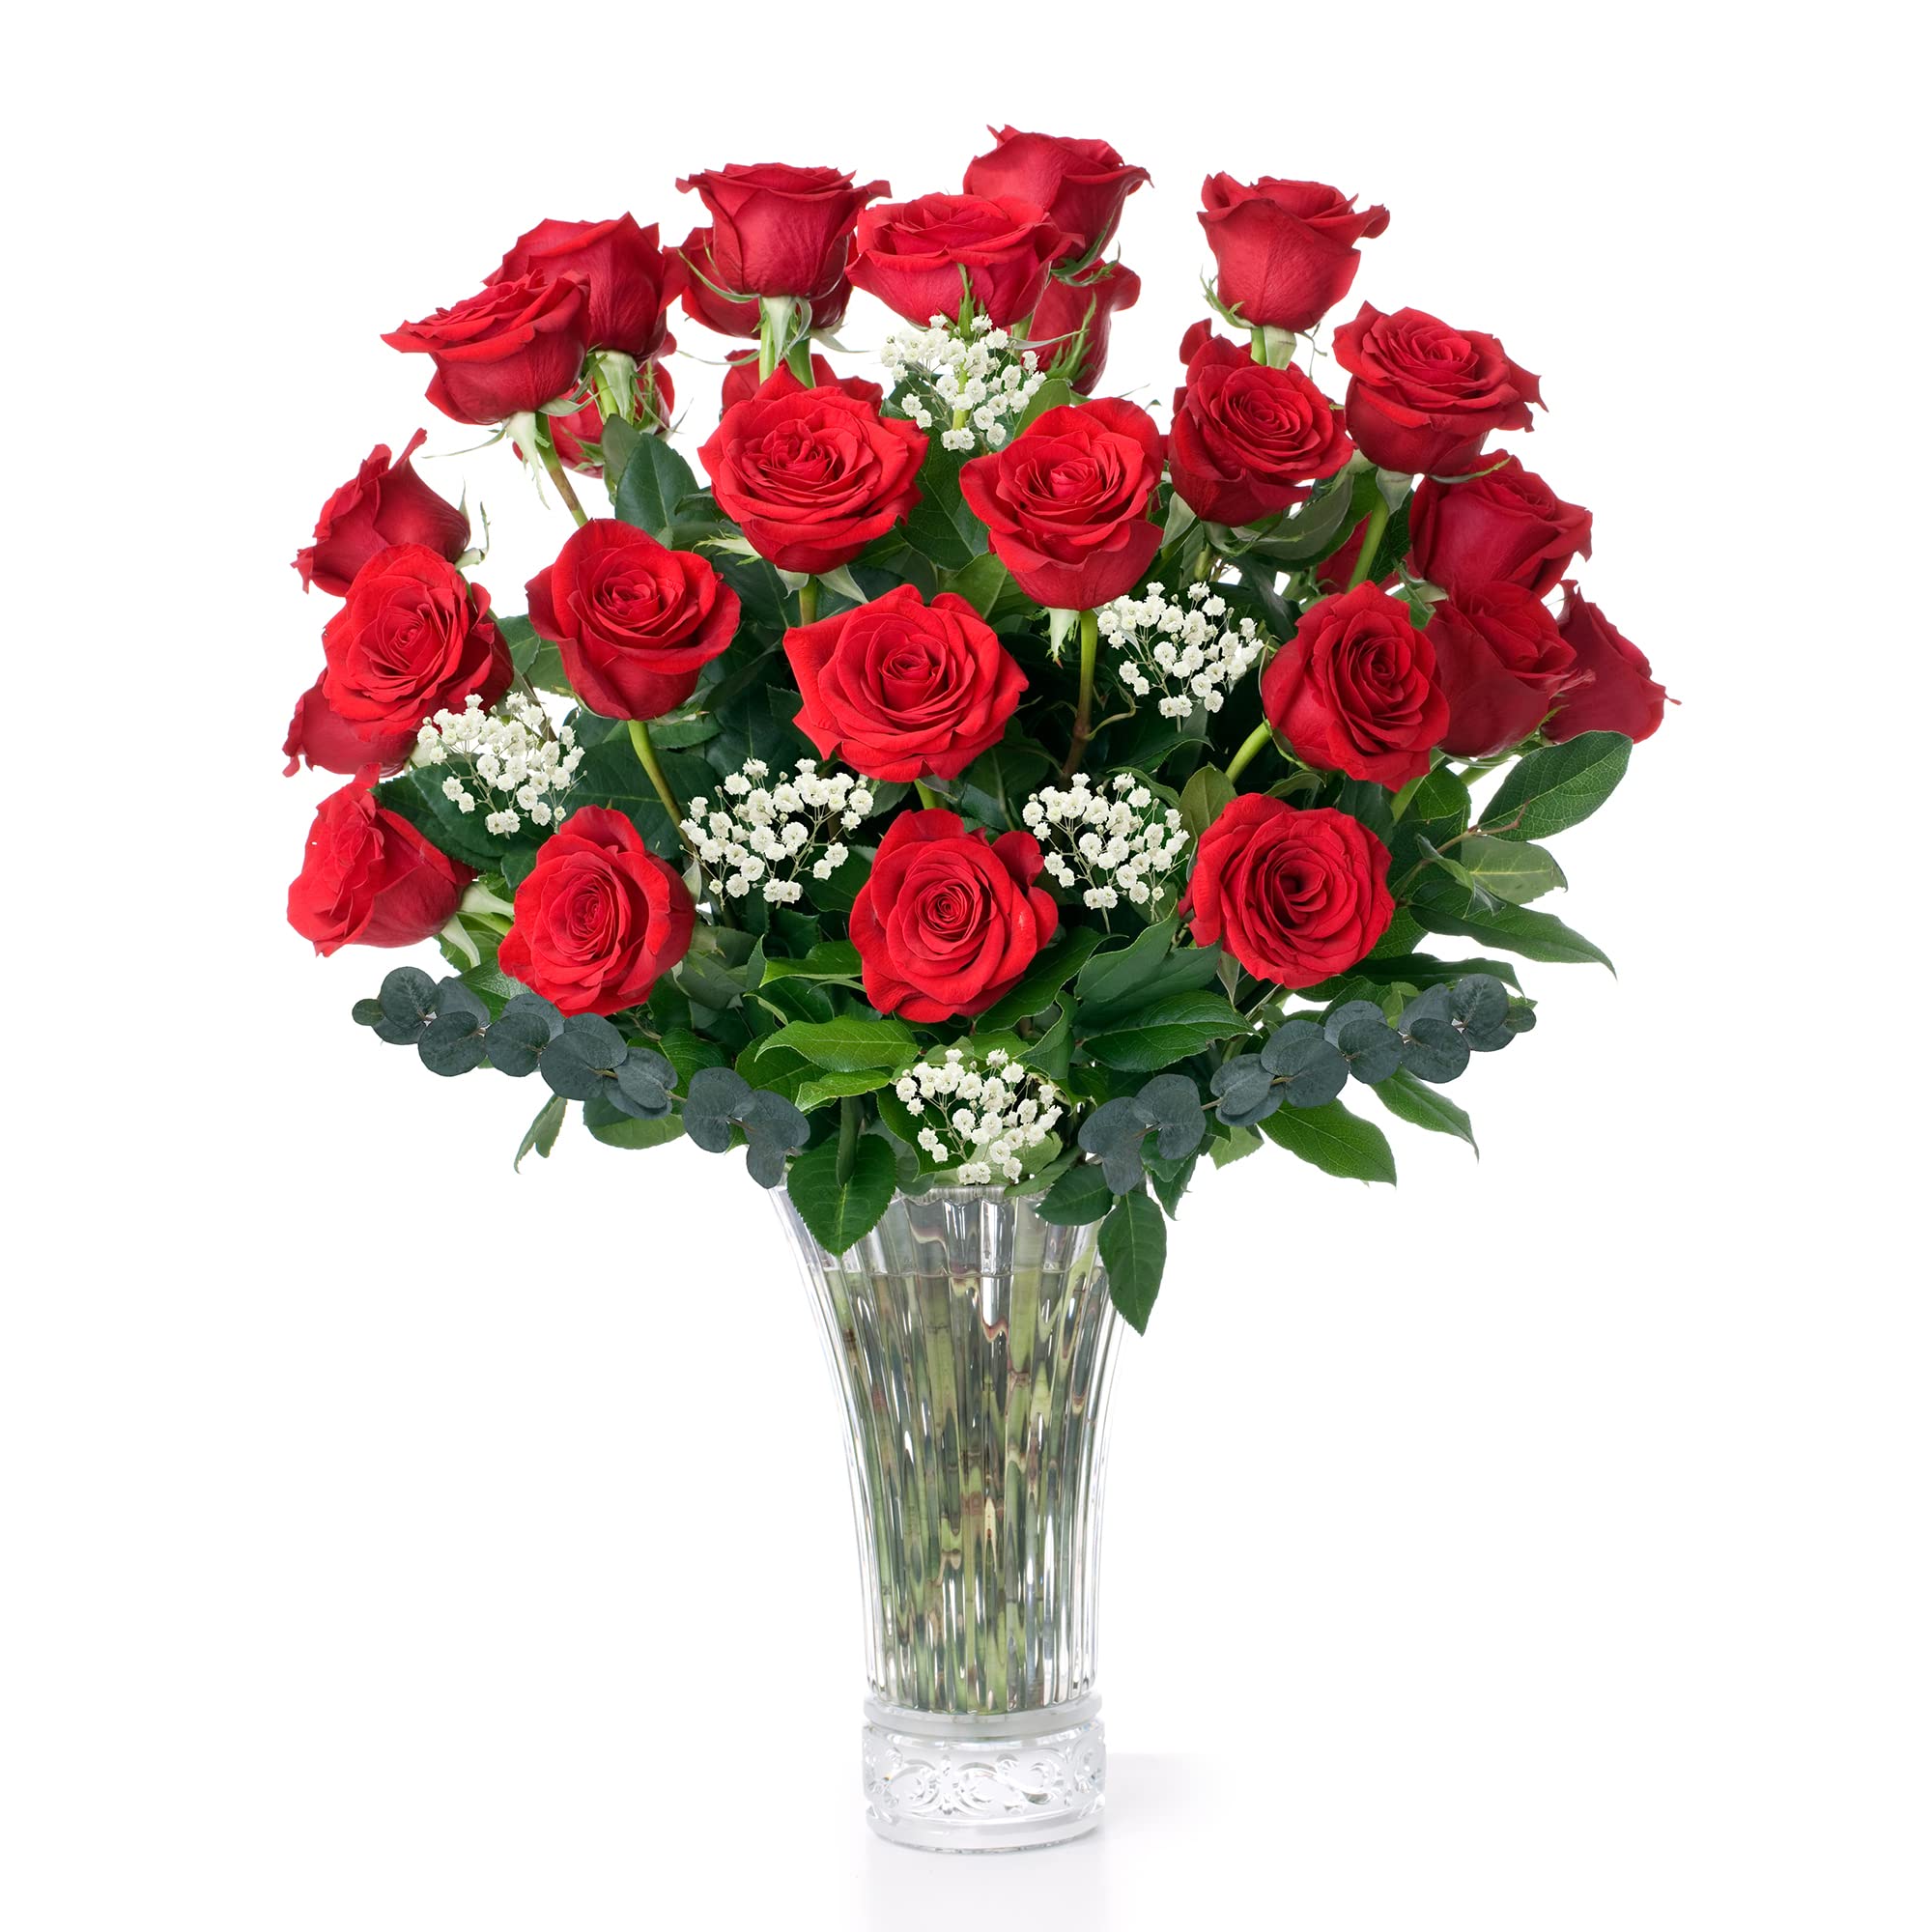 Red Roses Fresh Flowers Delivery by Wed, Aug 3rd - 2 Dozen Roses for Delivery/Farmhouse Flowers for Delivery - Fresh Cut Long Stem Roses Bouquet of...